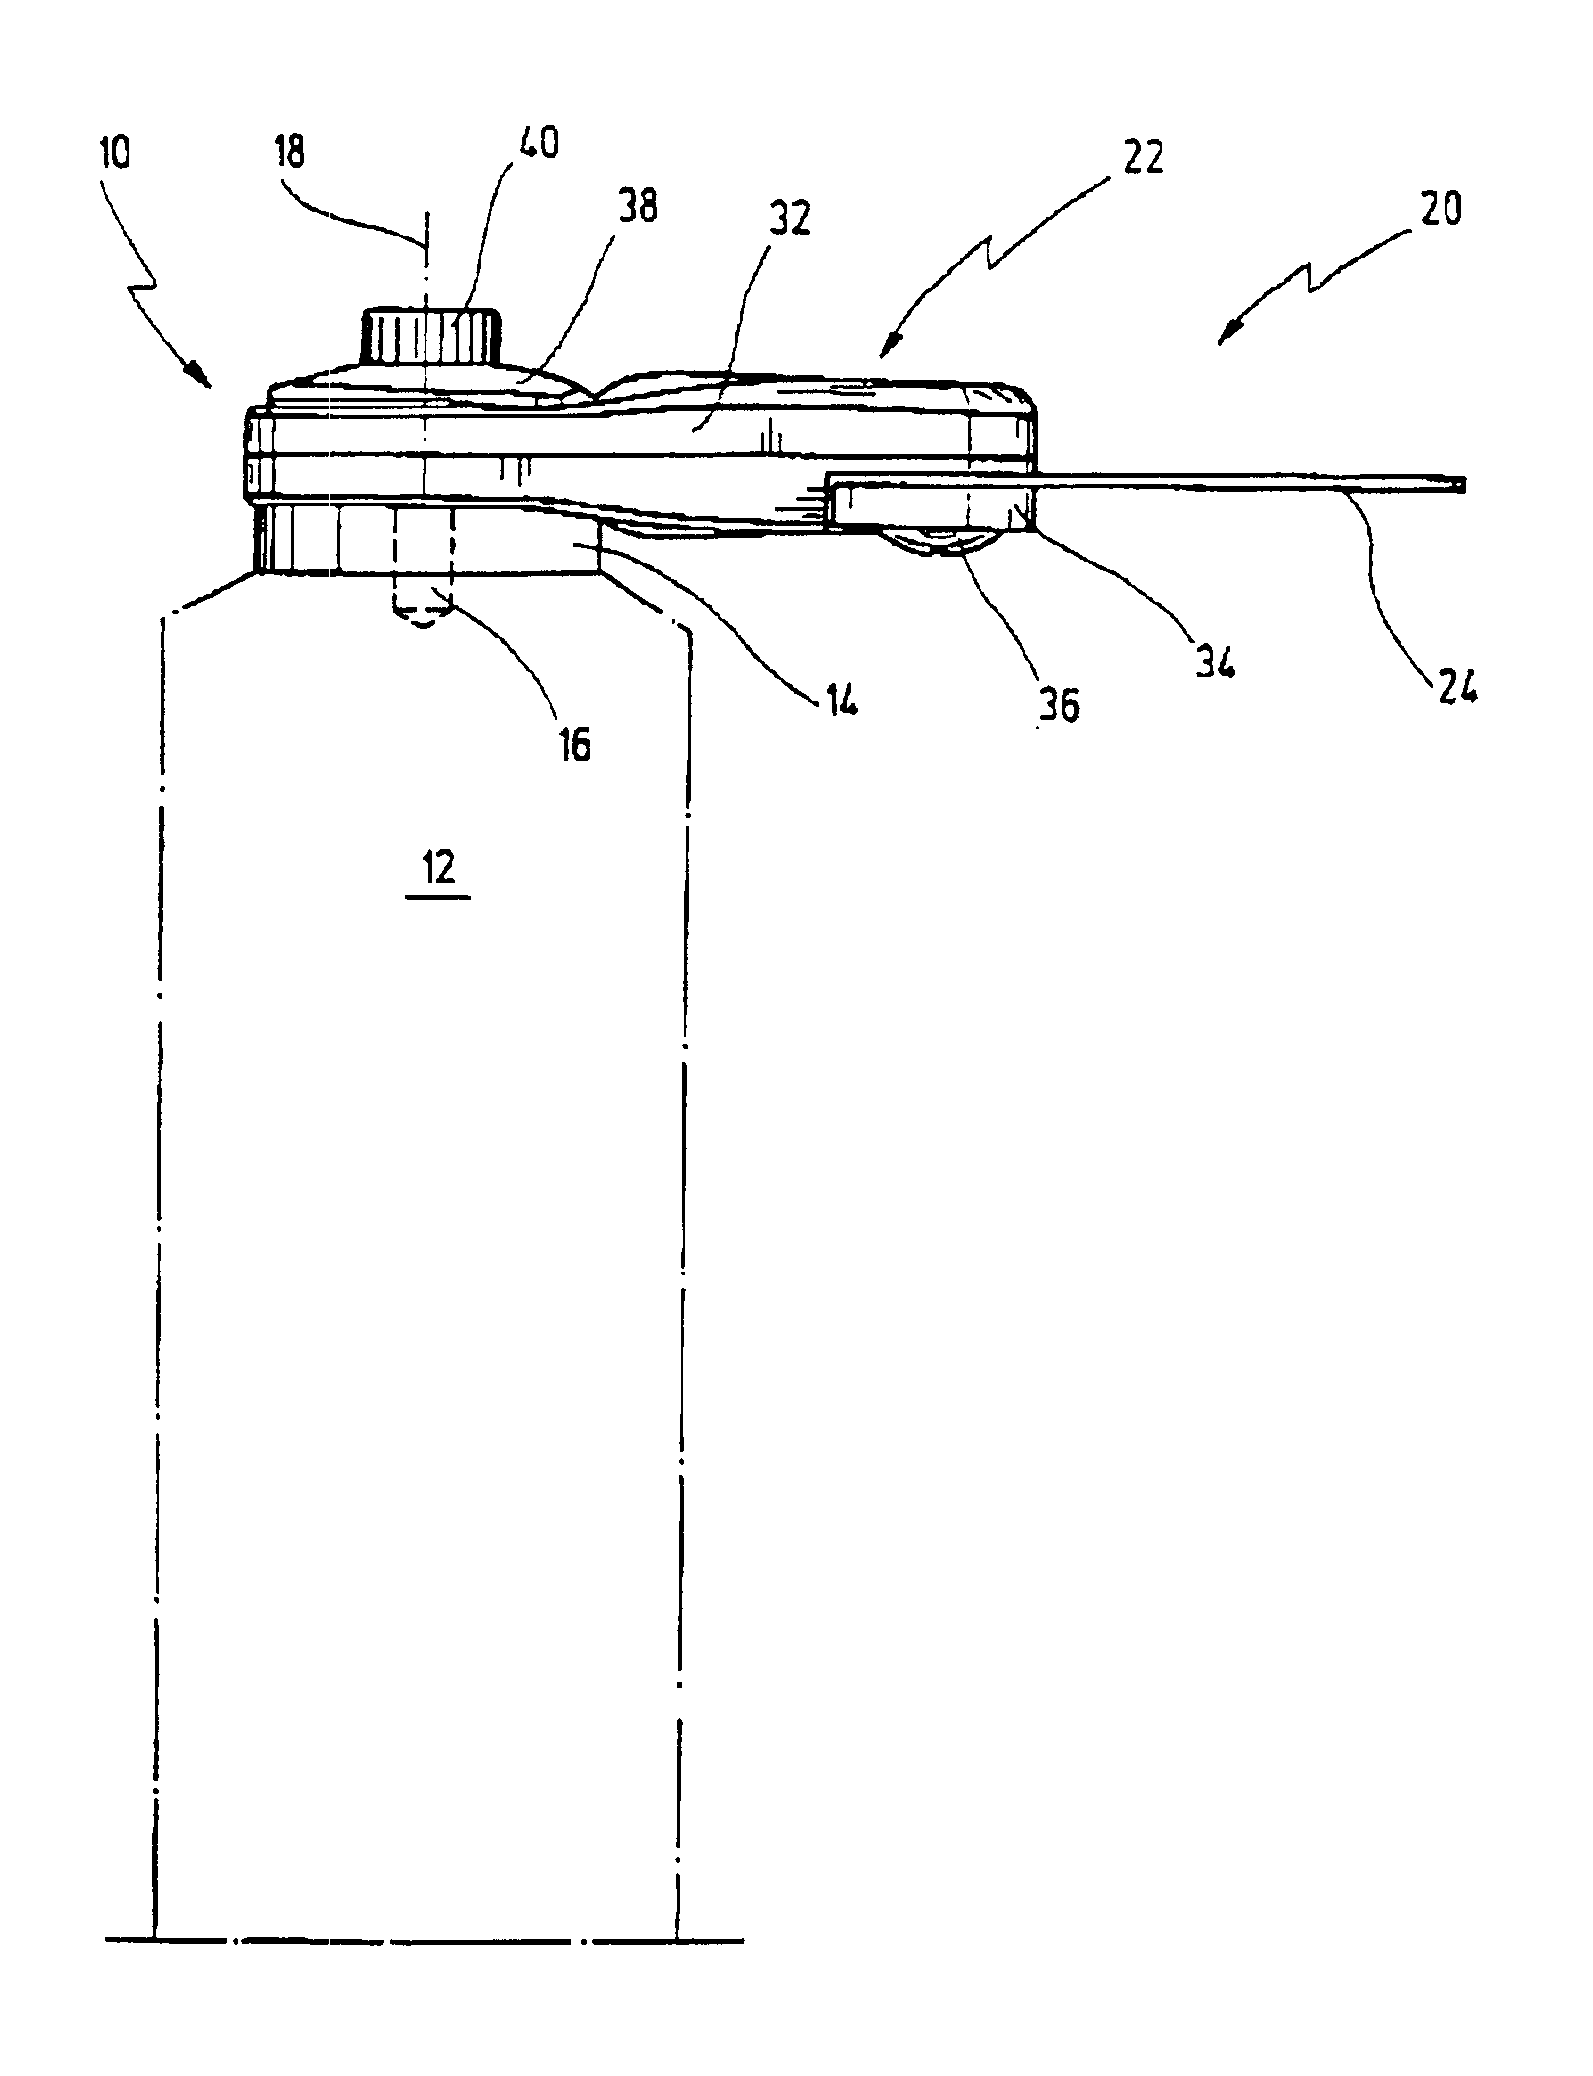 Tool having a holder for mounting on a drive shaft